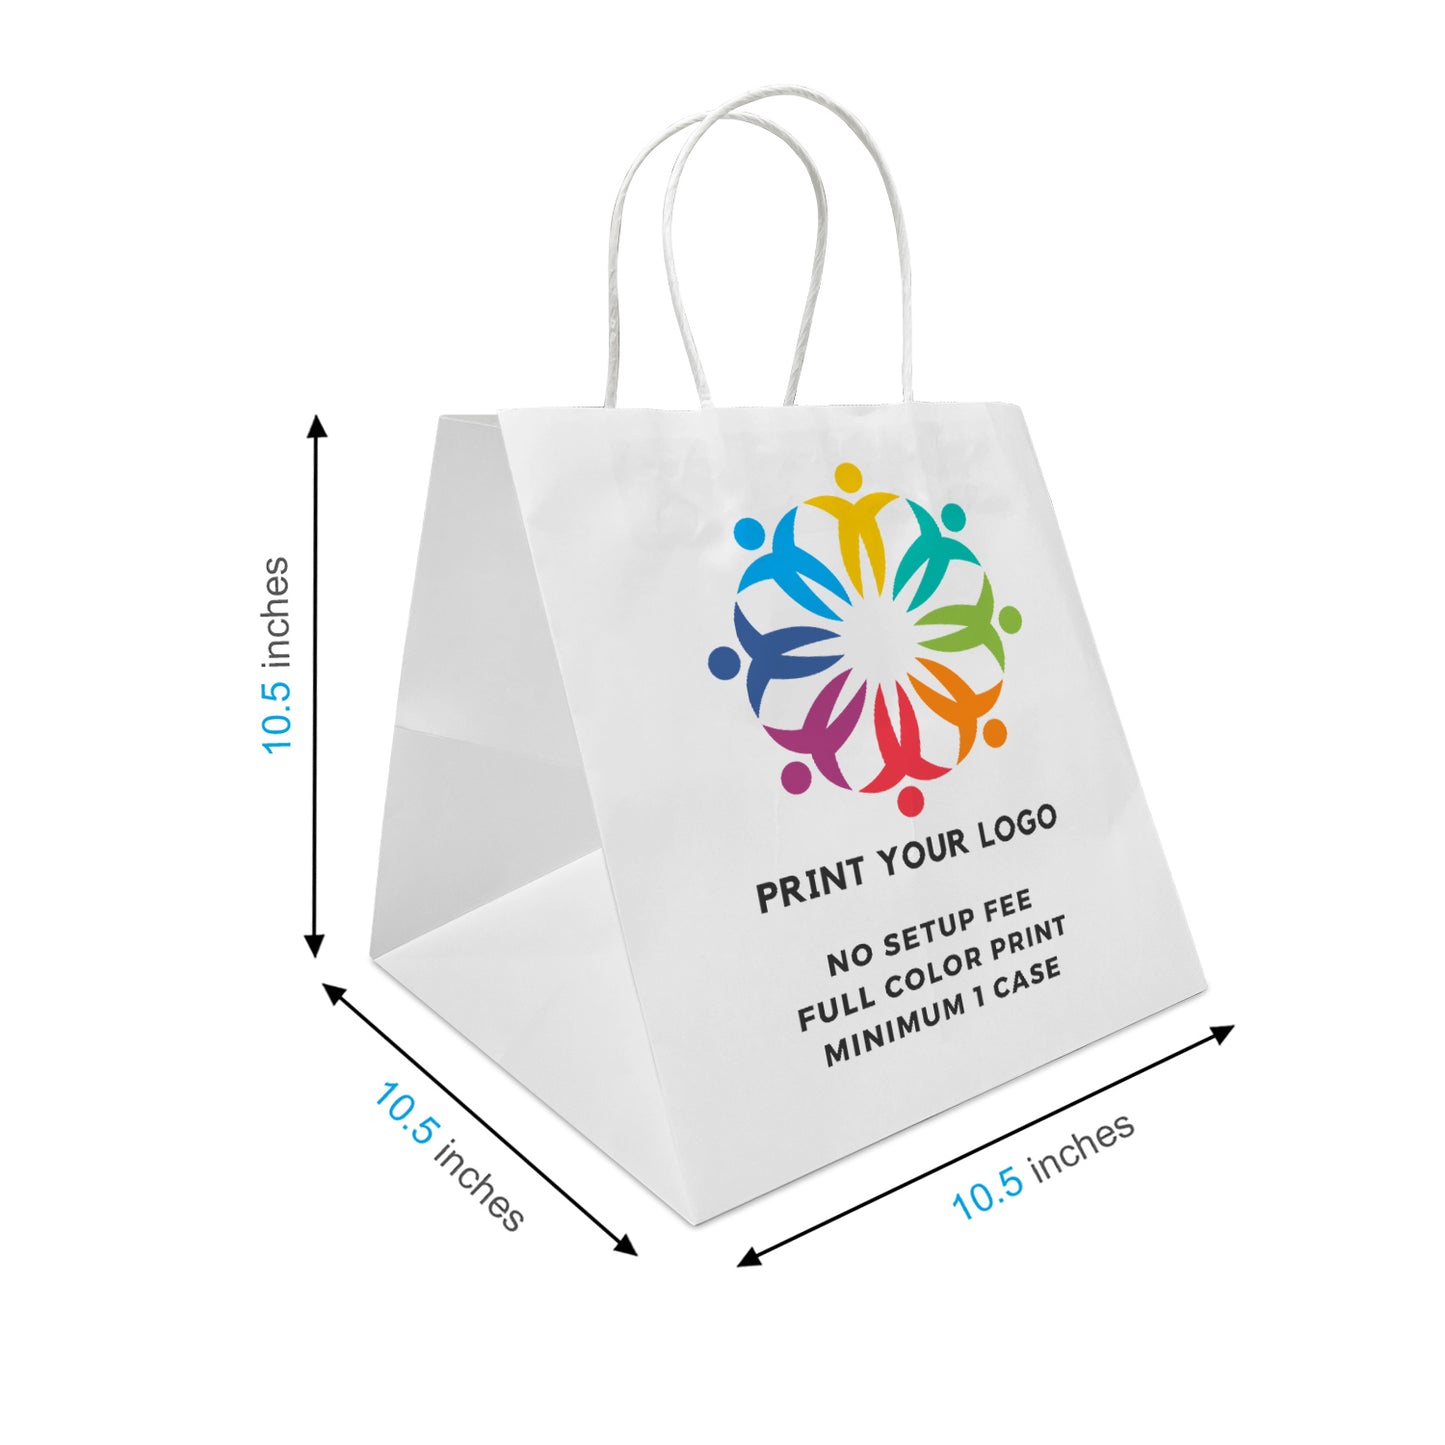 250pcs, Cube 10.5x10.5x10.5 inches White Paper Bags Twisted Handles, Full Color Custom Print, Printed in North America